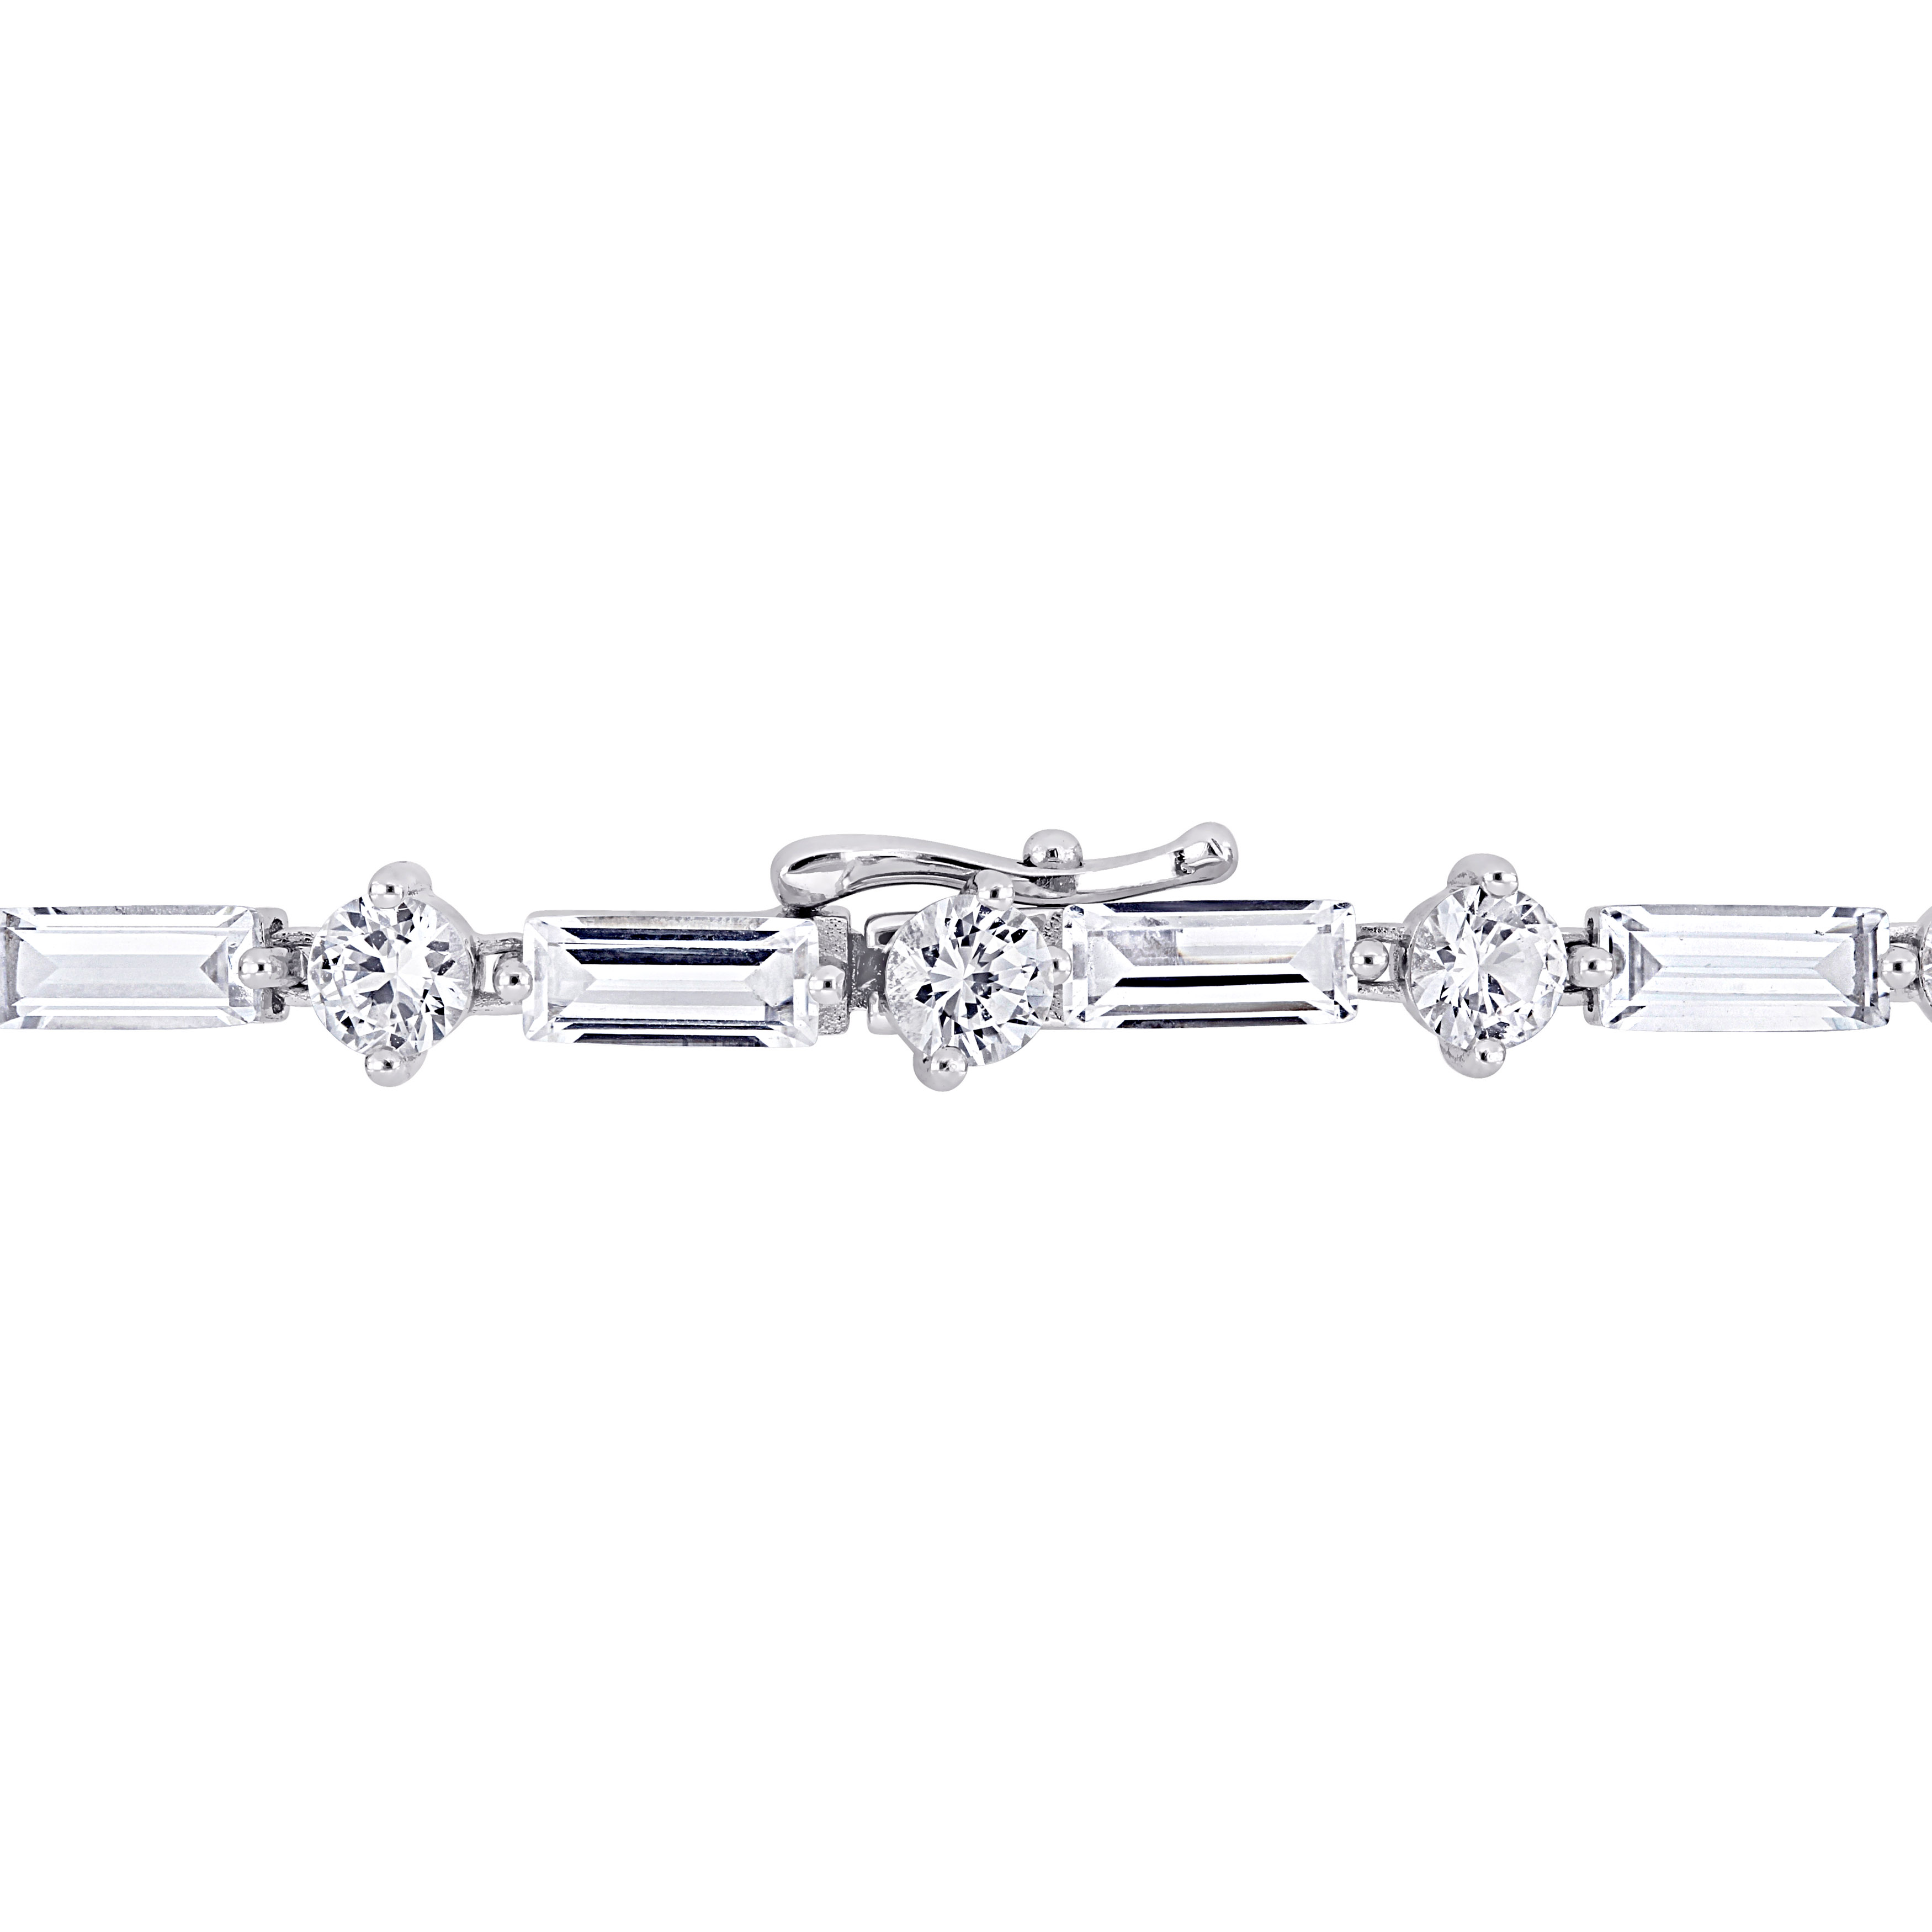 13 4/5 CT TGW Baguette & Round Created White Sapphire Bracelet in Sterling Silver - 7.25 in.